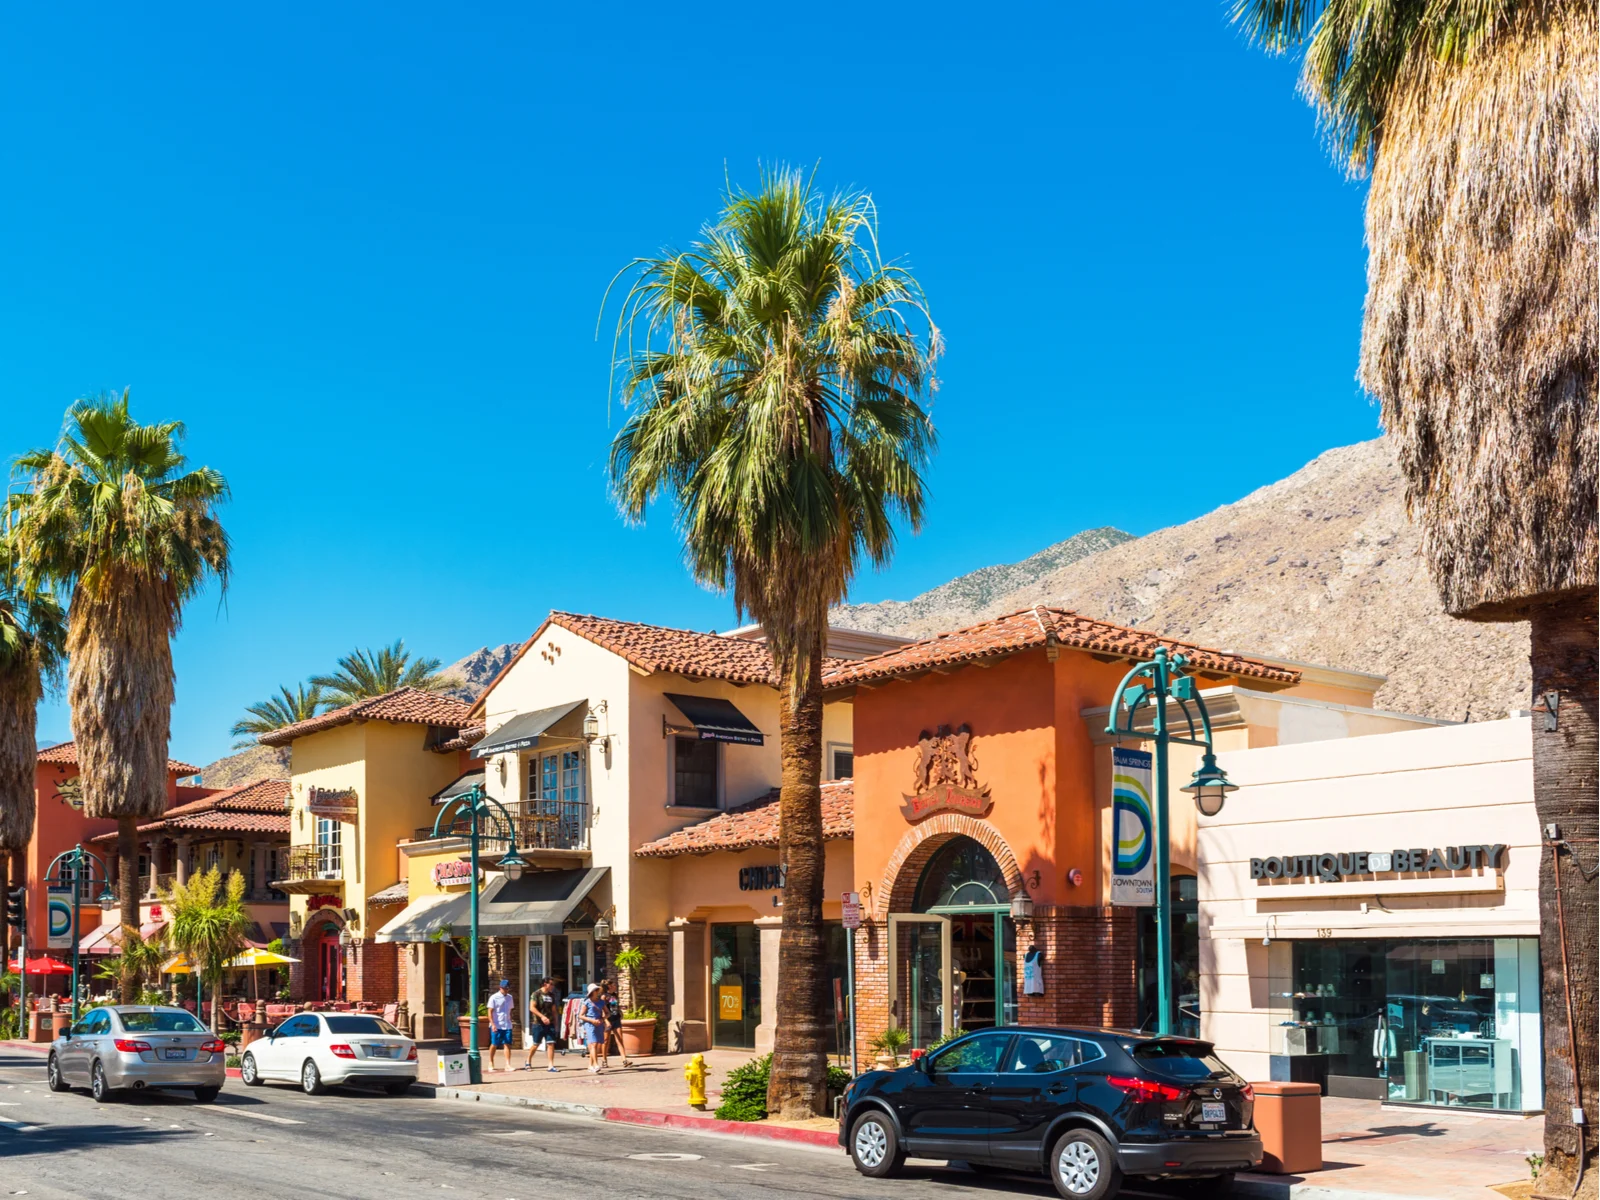 Shops in Downtown Palm Springs as seen from the street